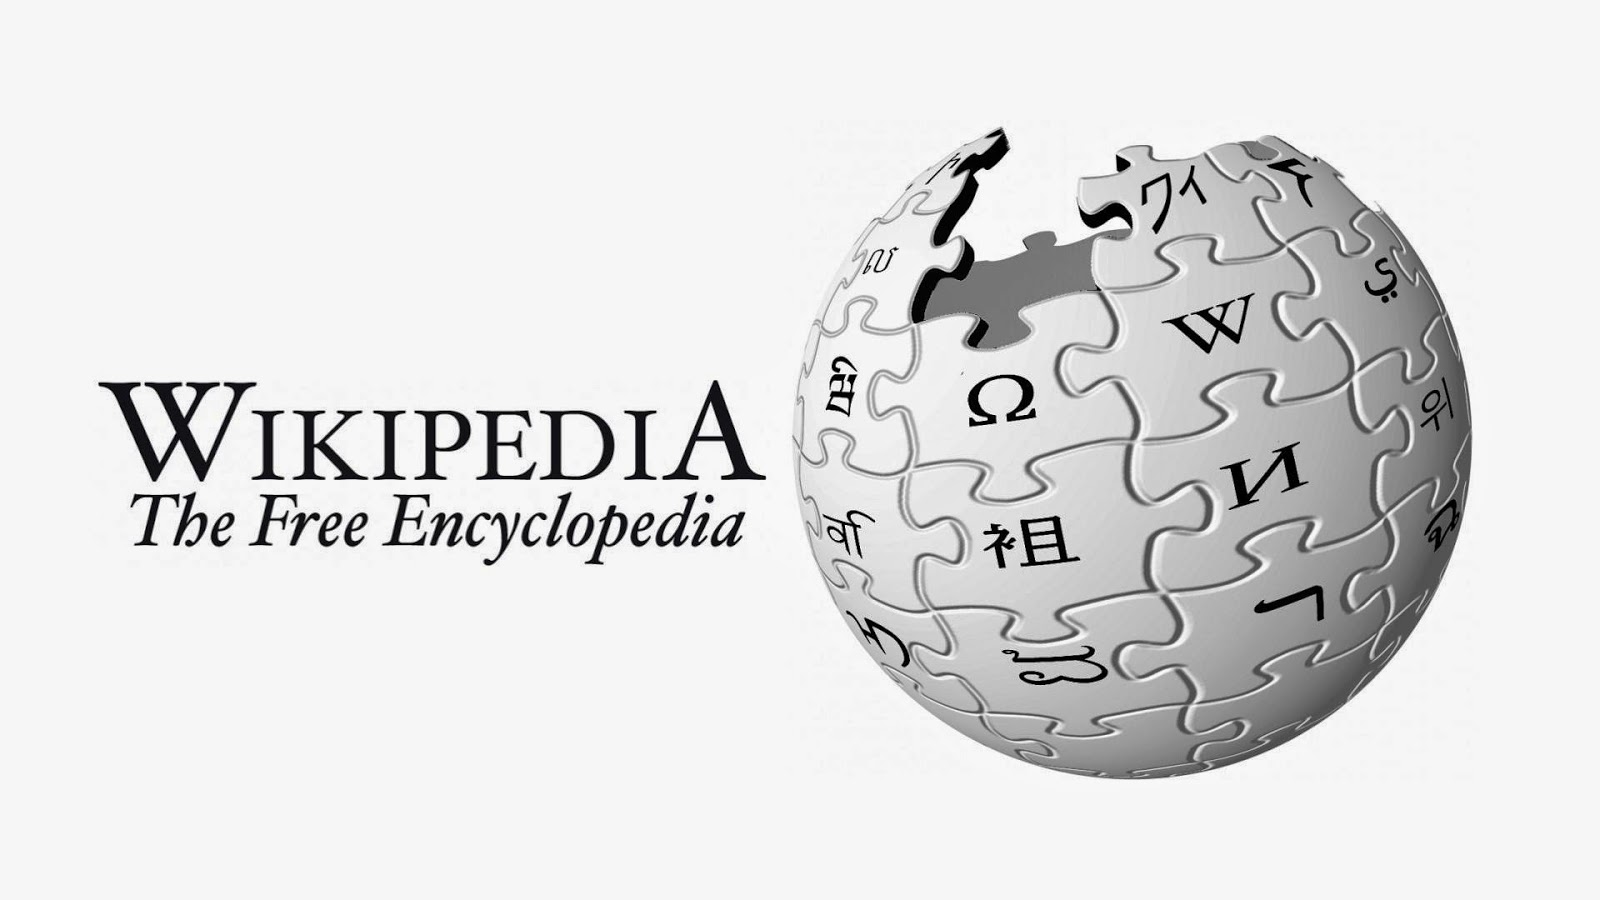 Survey: What do Pakistani readers think of Wikipedia?